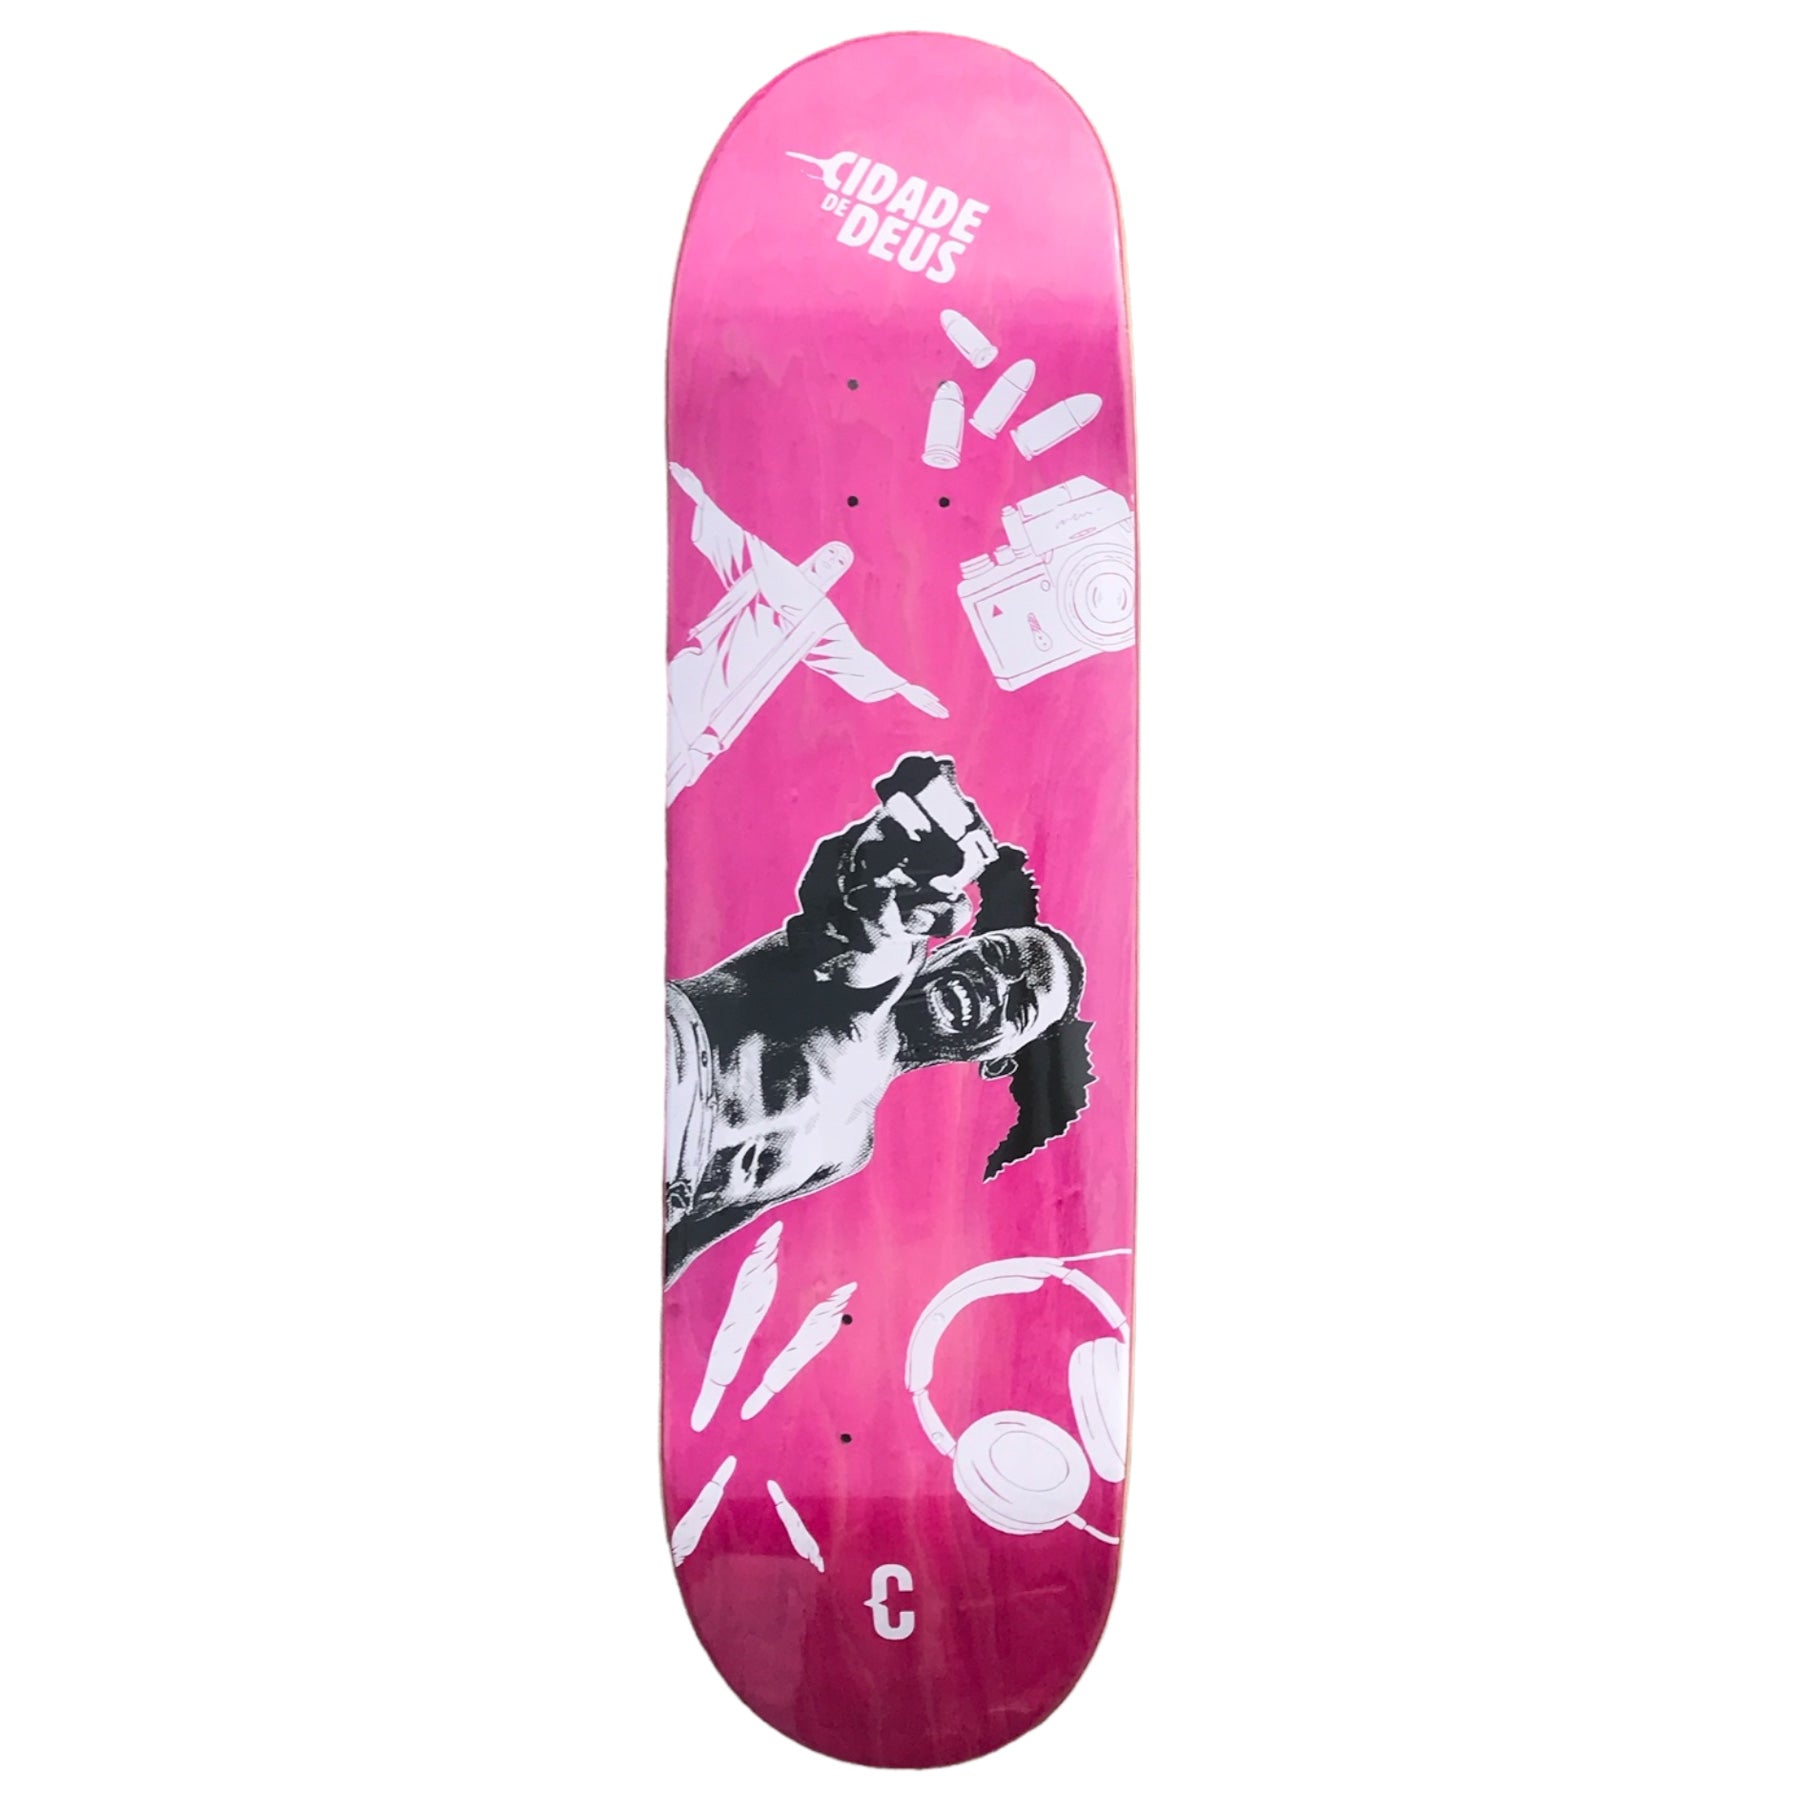 Clown skateboards allcity deck in pink with a city of god film inspired graphic. Free uk shipping over £50